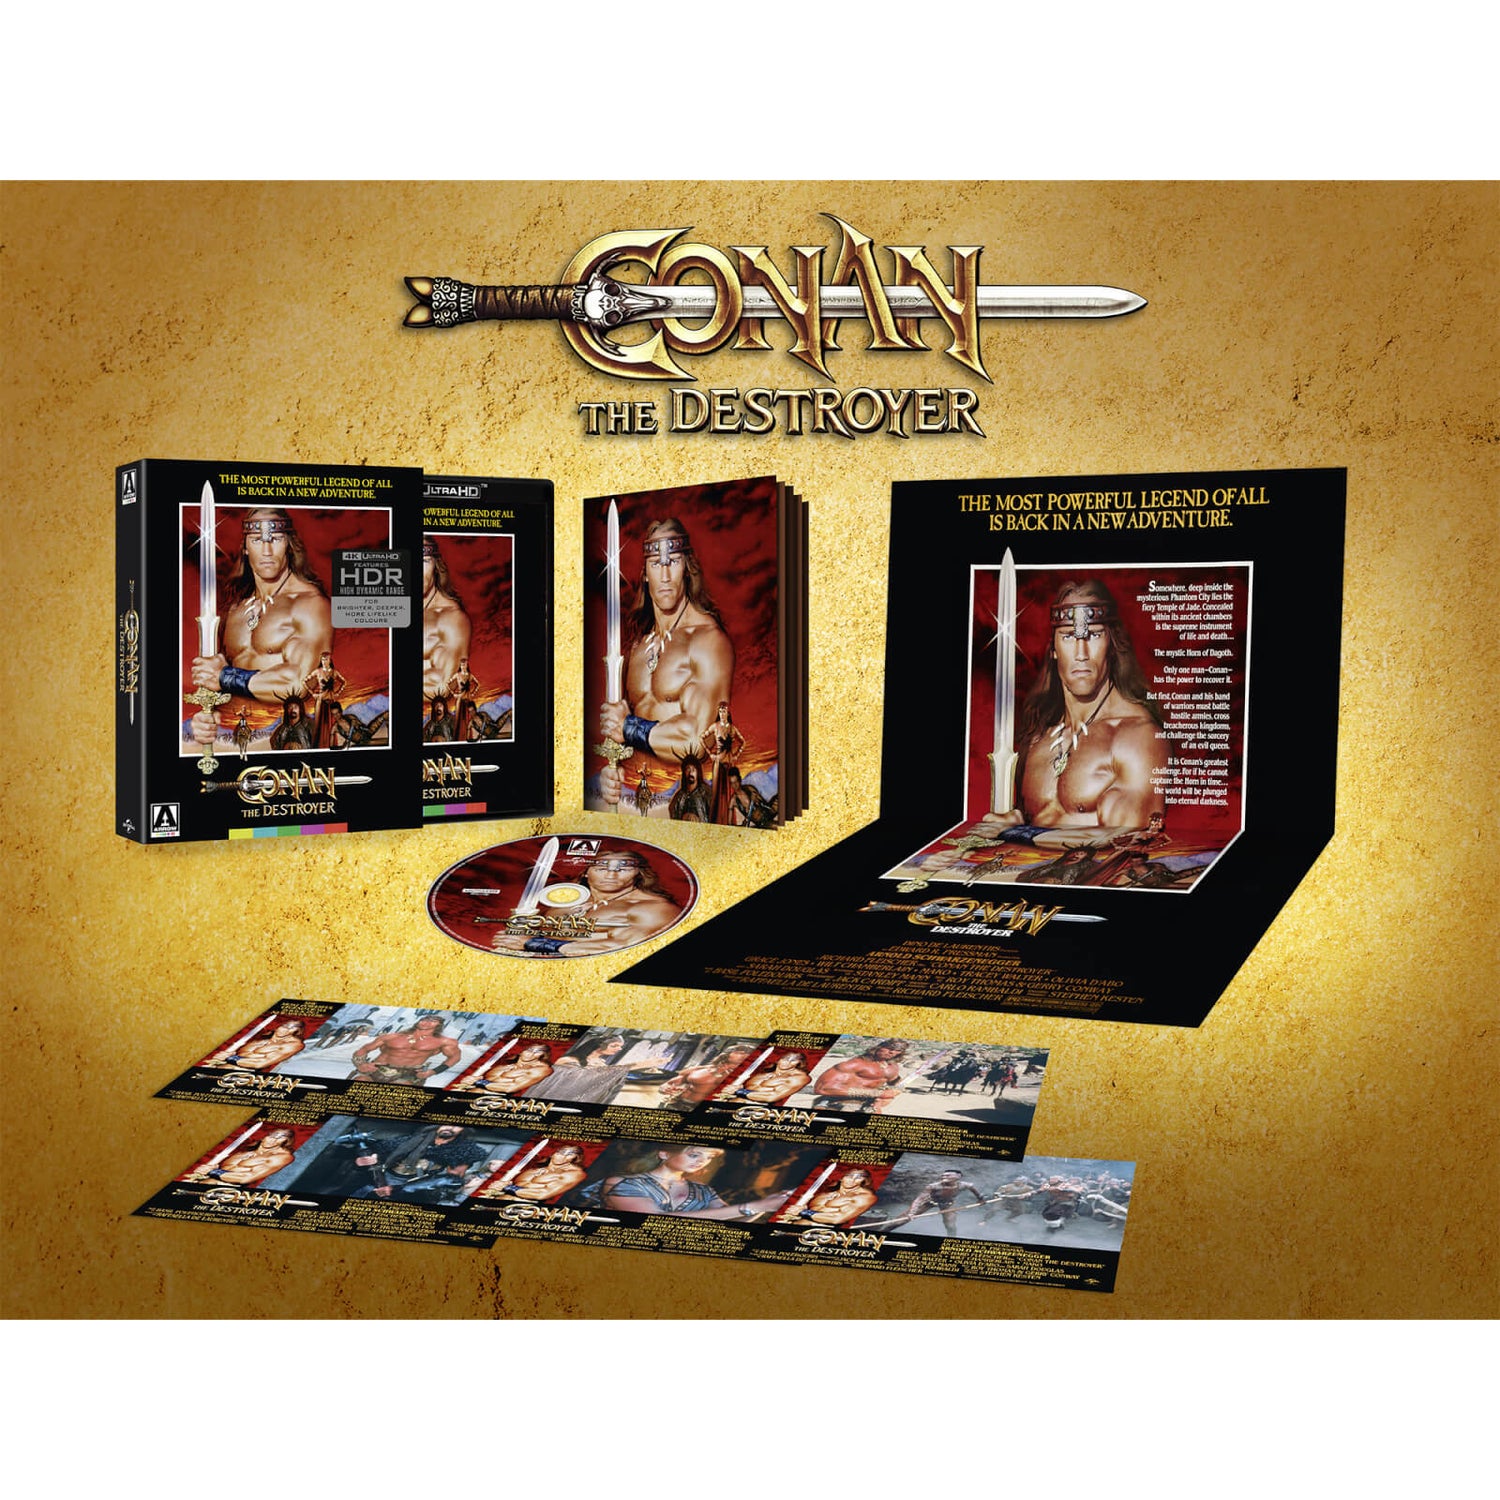 Conan The Destroyer Limited Edition 4K UHD